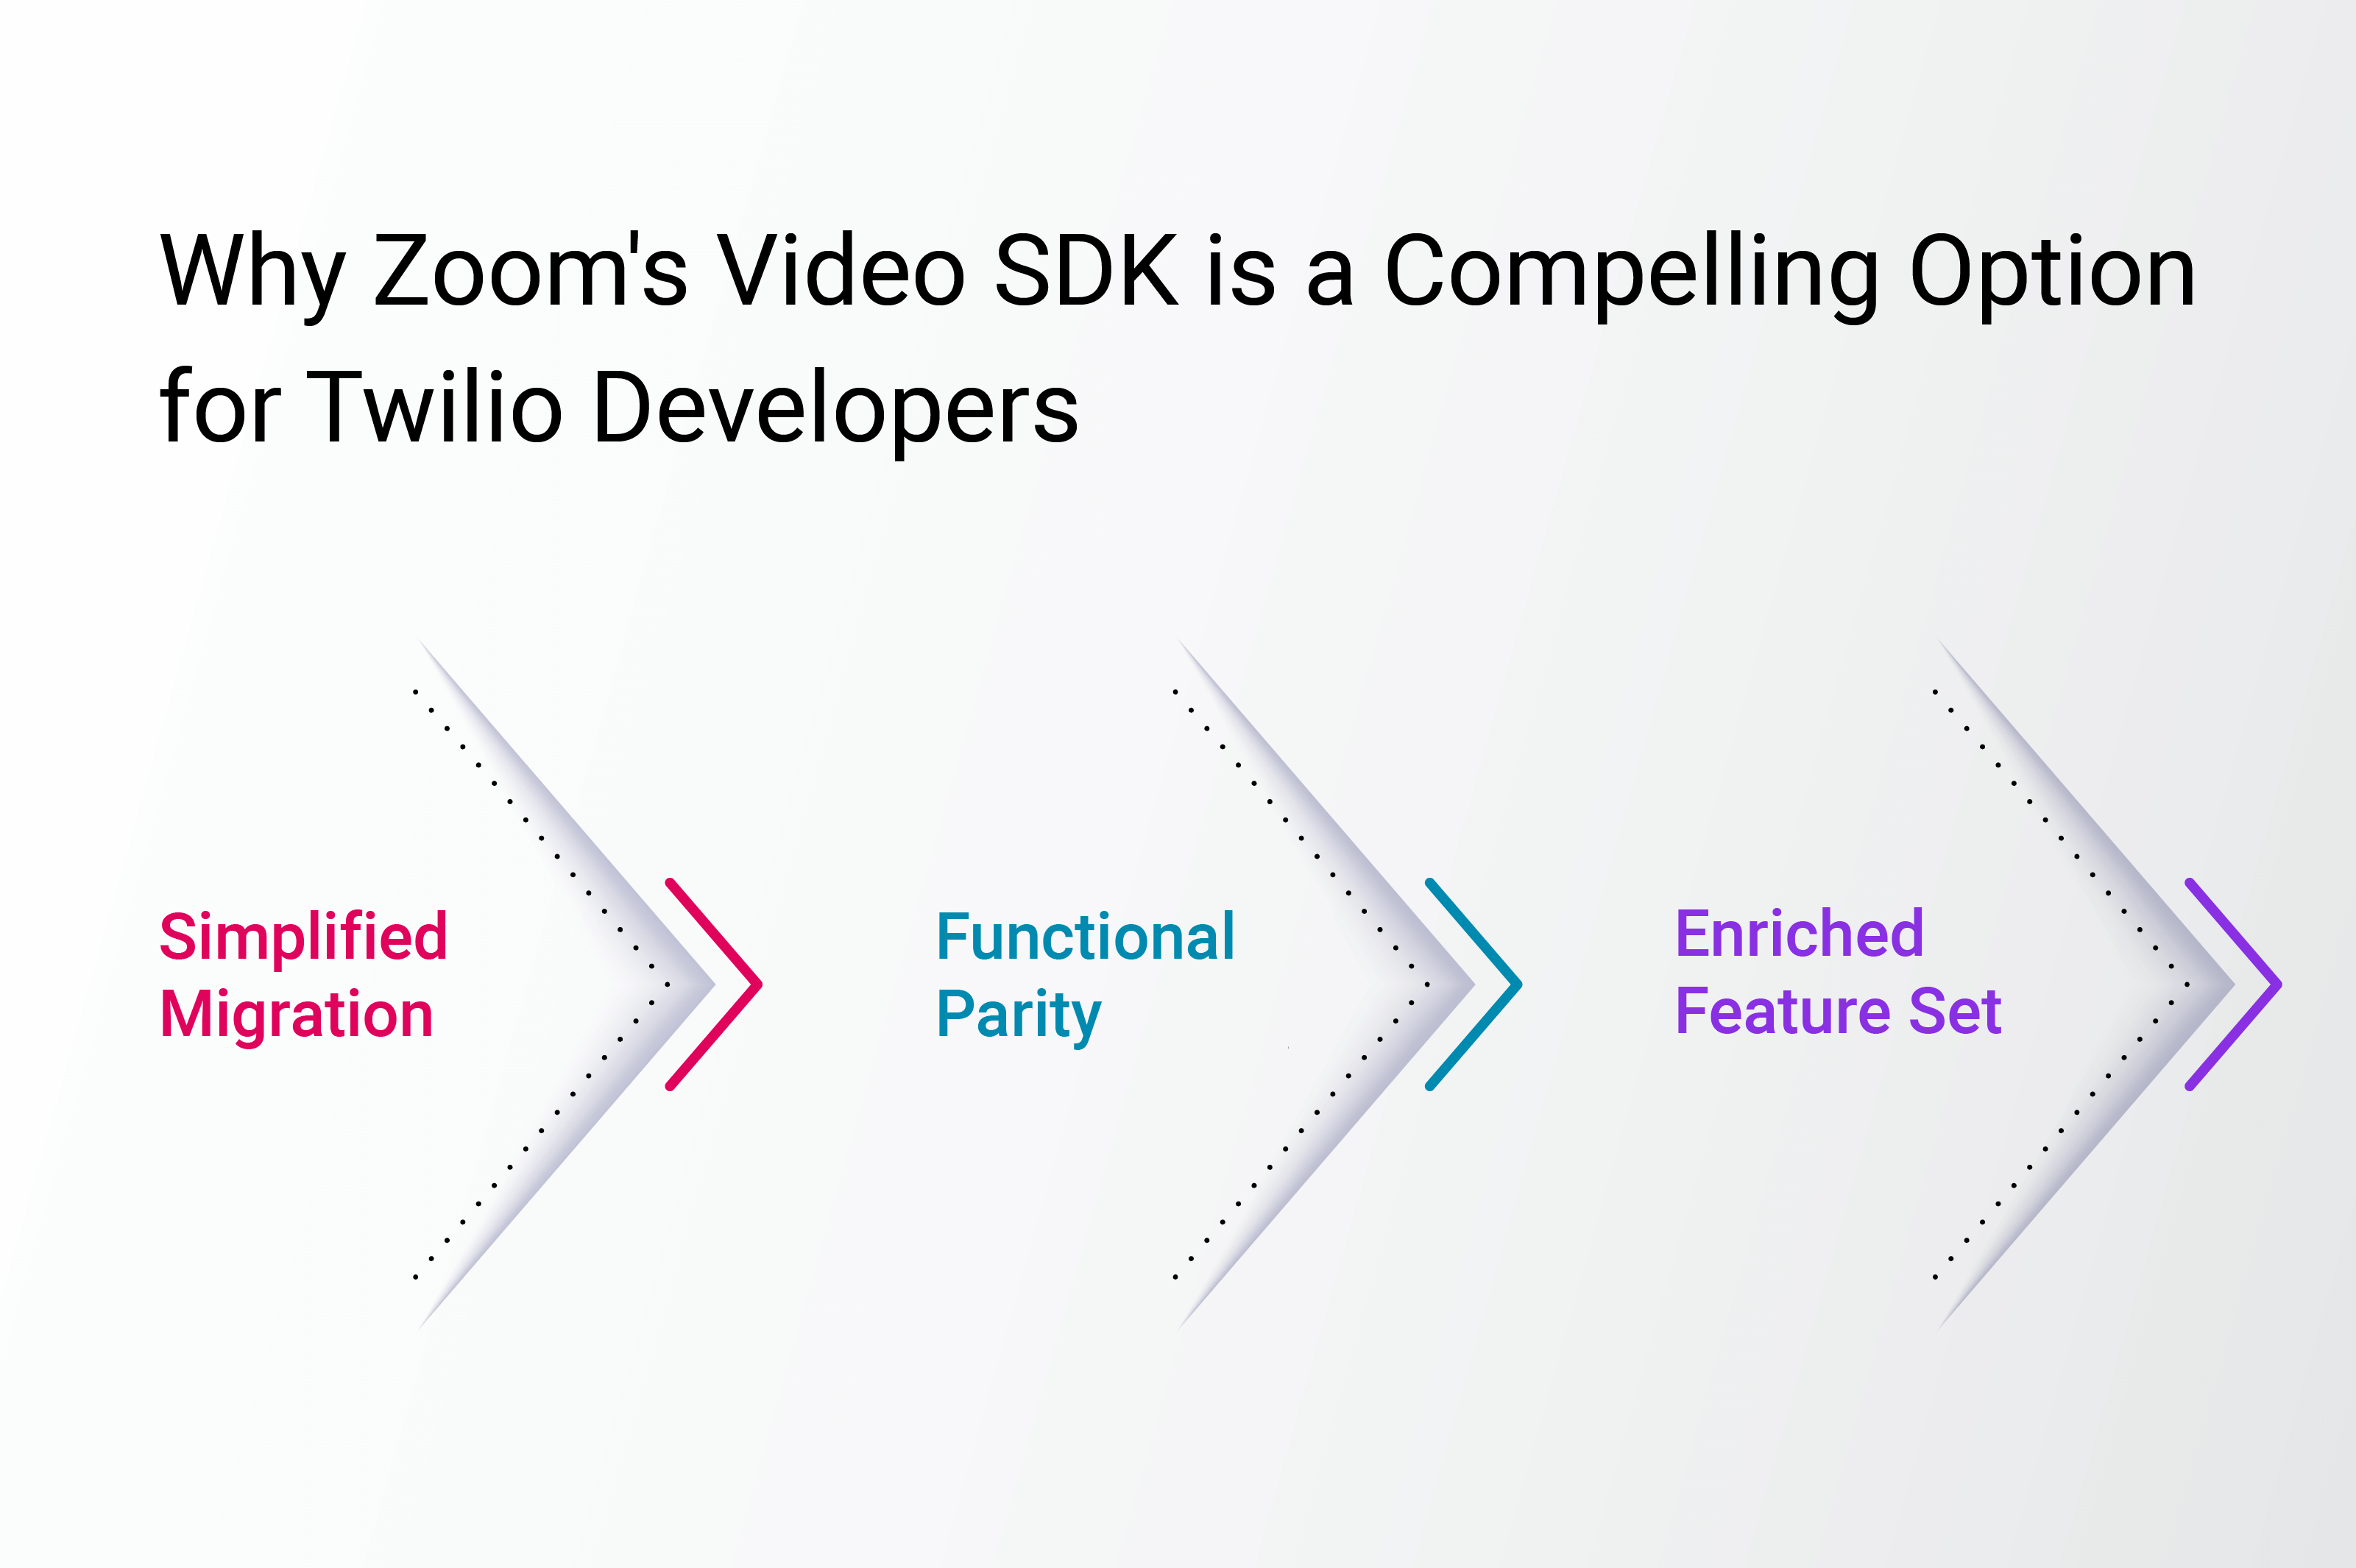 Why Zoom's Video SDK is a Compelling Option for Twilio Developers